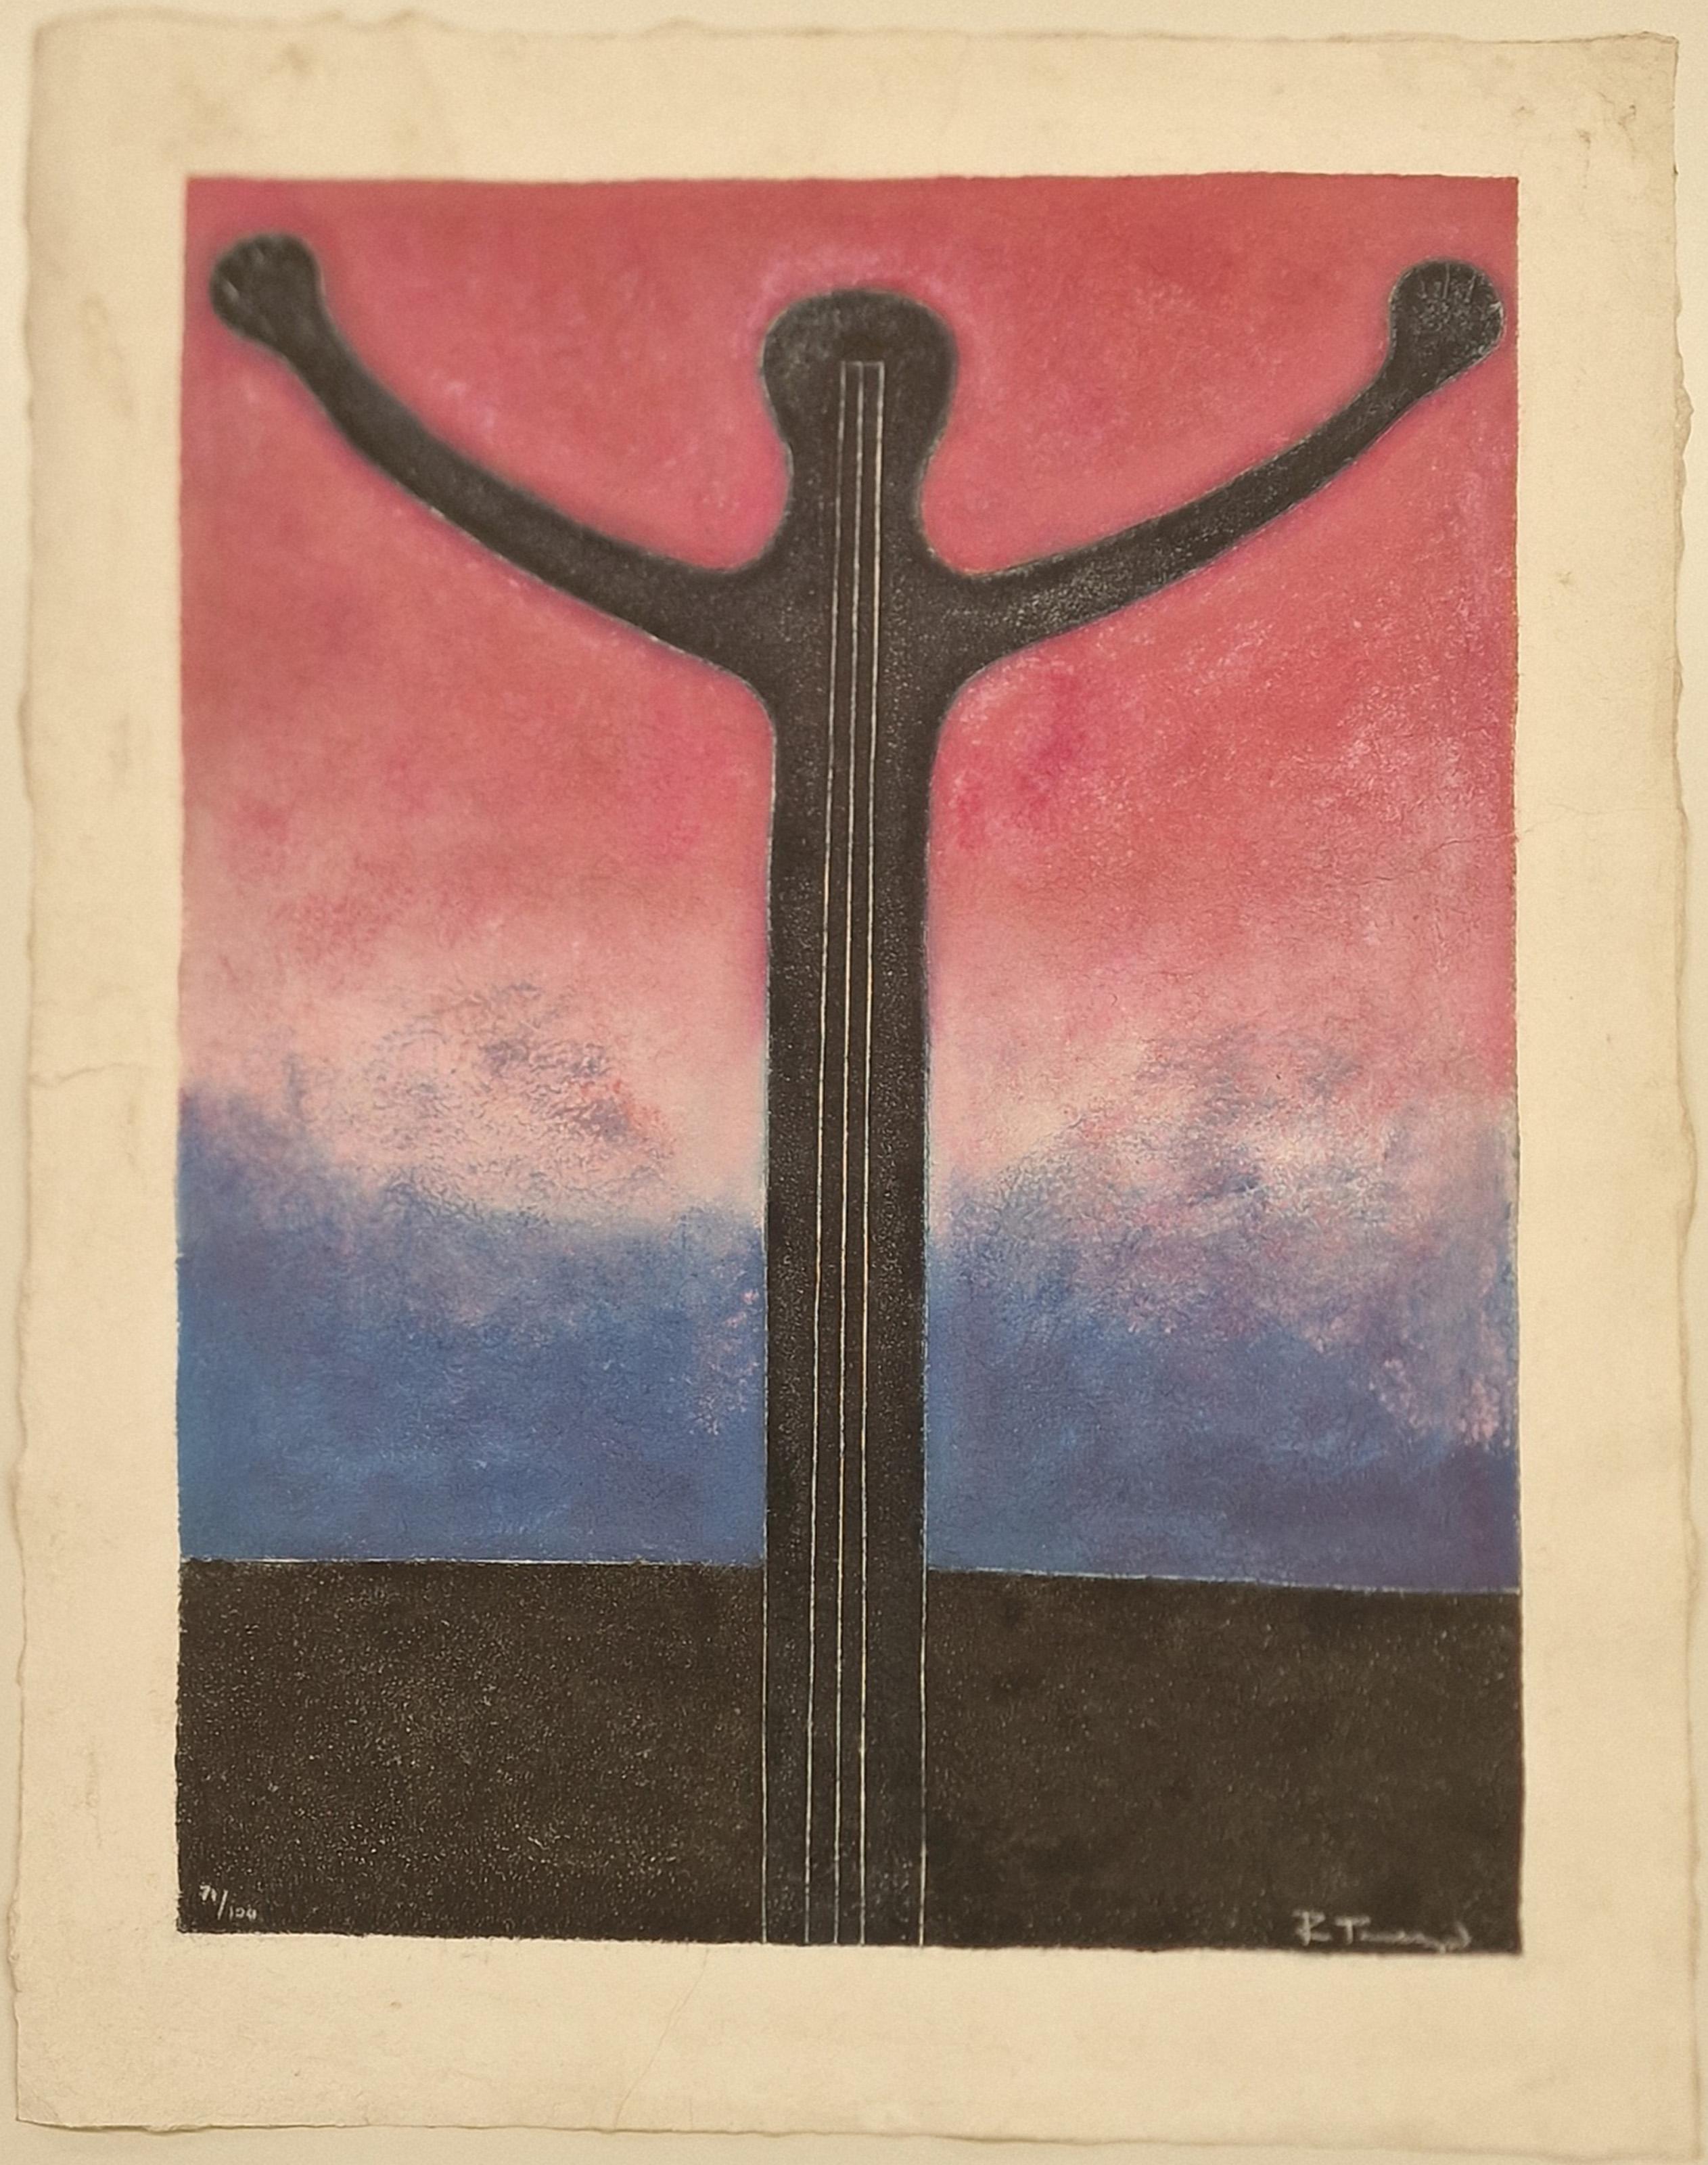 Rufino Tamayo, Mexican (1899 - 1991) -  Hombre con Brazos Abiertos. Year: 1984, Medium: Mixograph, signed and numbered in pencil, Edition: 71/100, Size: 35.5 x 26.75 in. (90.17 x 67.95 cm), Printer: Taller de Grafica Mexicana, Reference: Pereda 325,